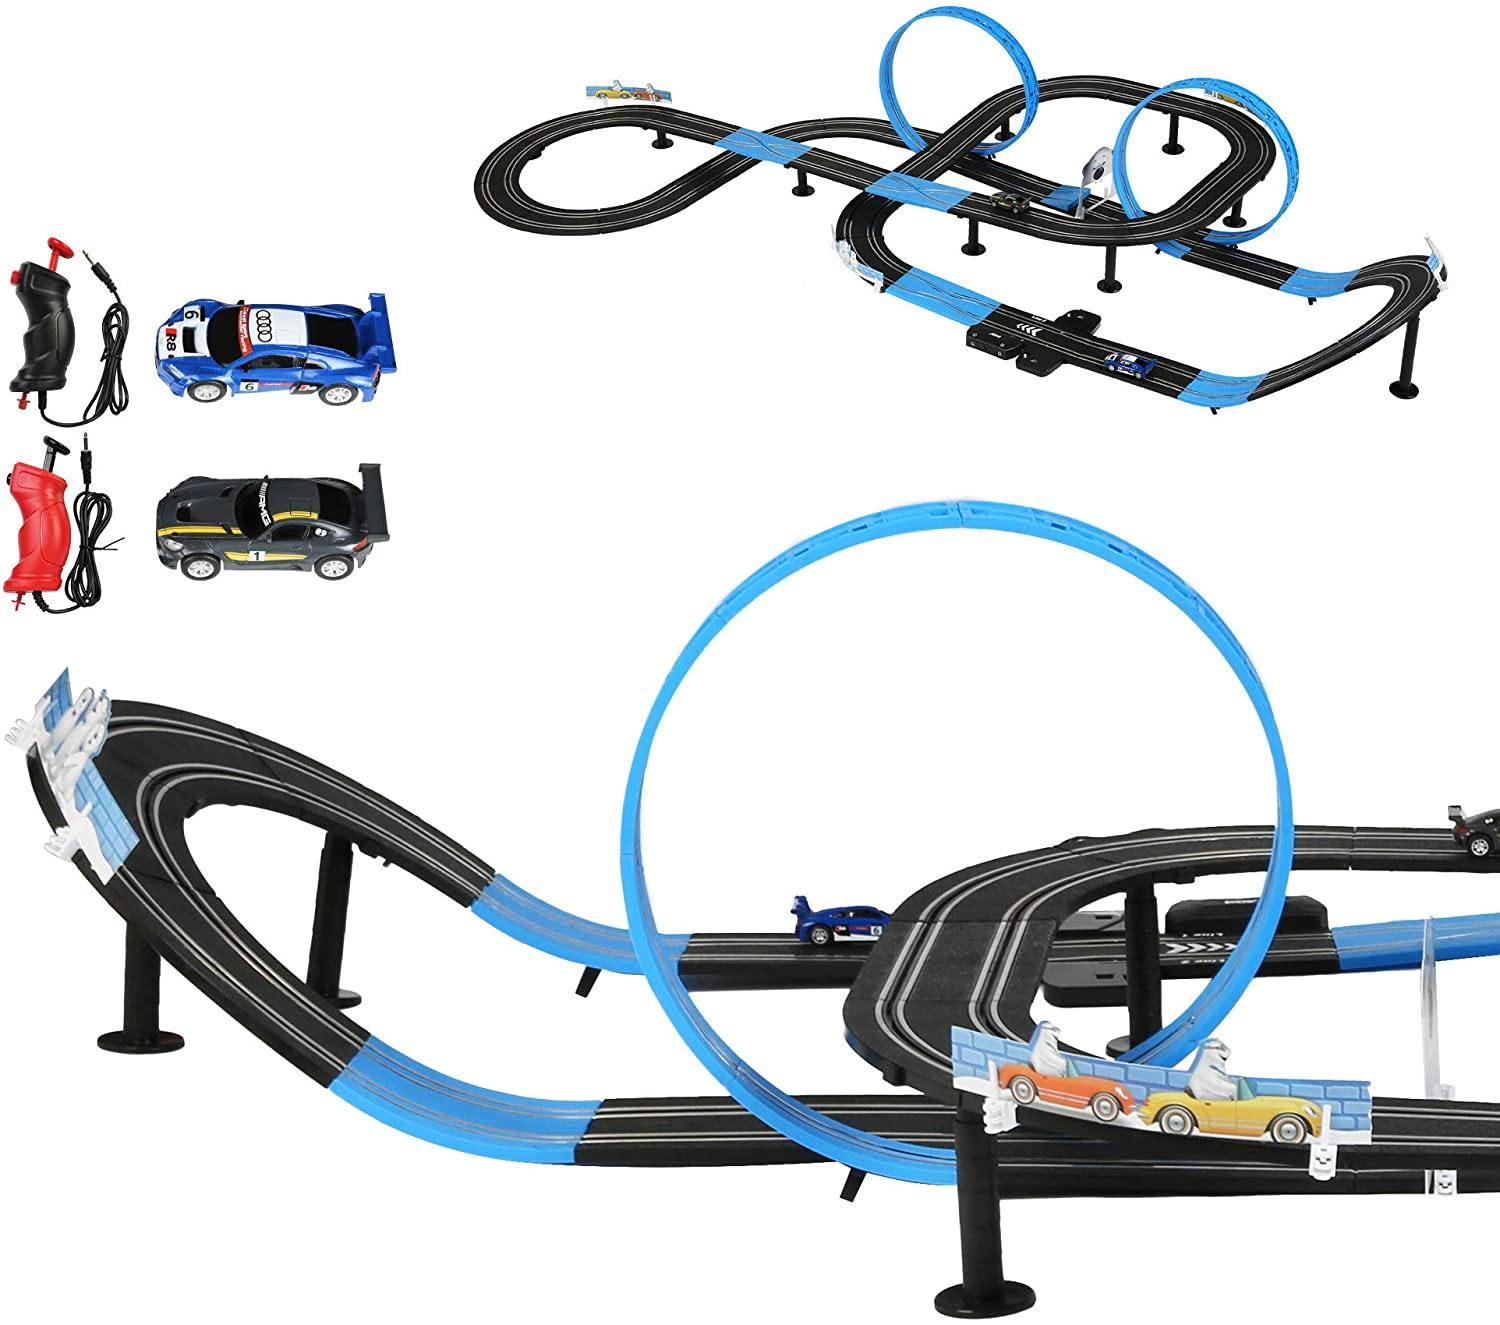 High-Speed Electric Powered Super Loop Speedway Slot Car Track Set with Two Cars for Dual Racing for Kids and Adult (28 ft) - Bosonshop